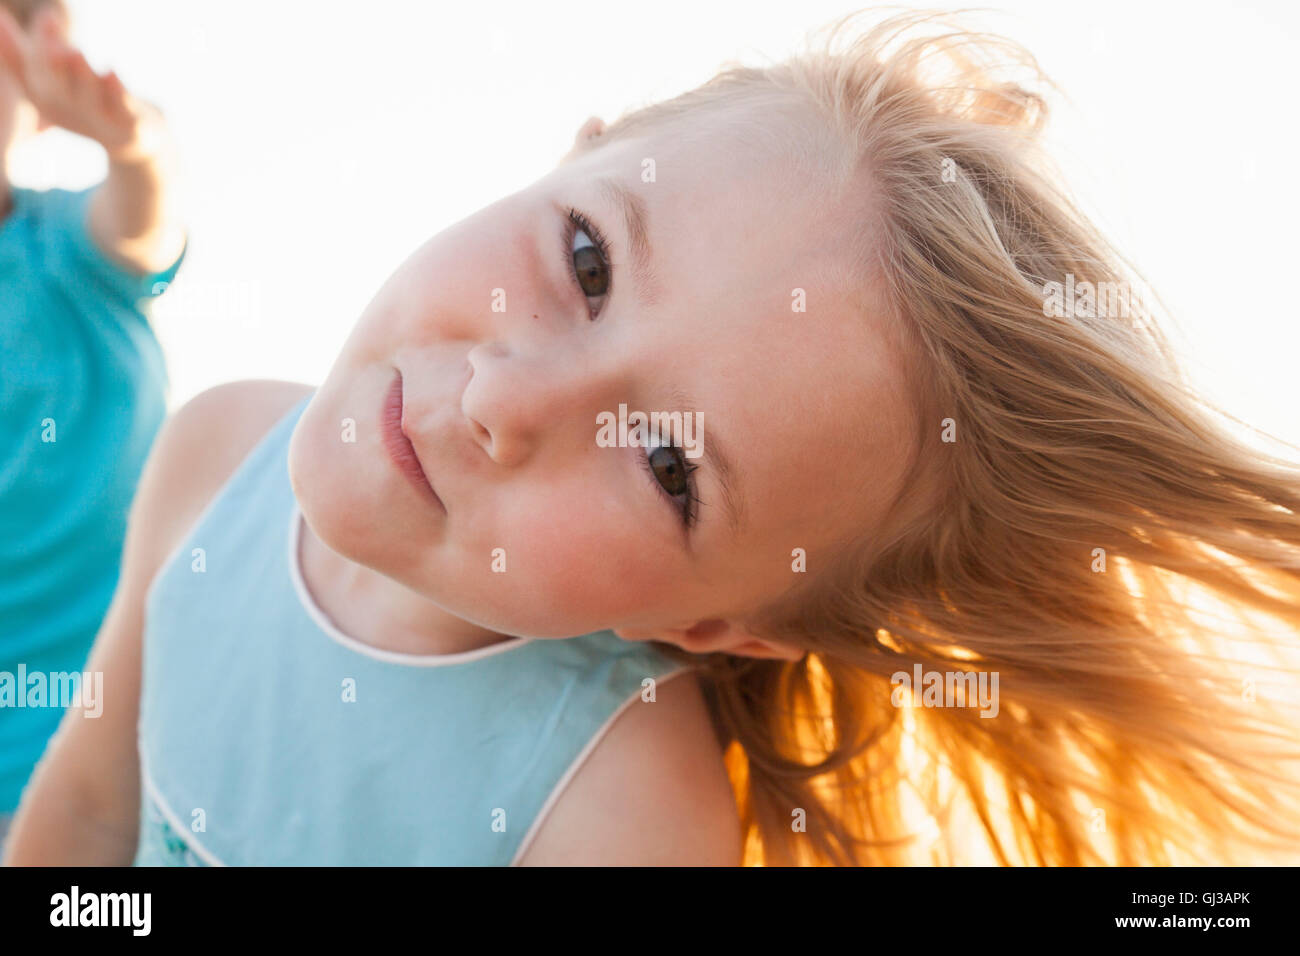 Portrait of girl, head cocked, looking at camera smiling Stock Photo